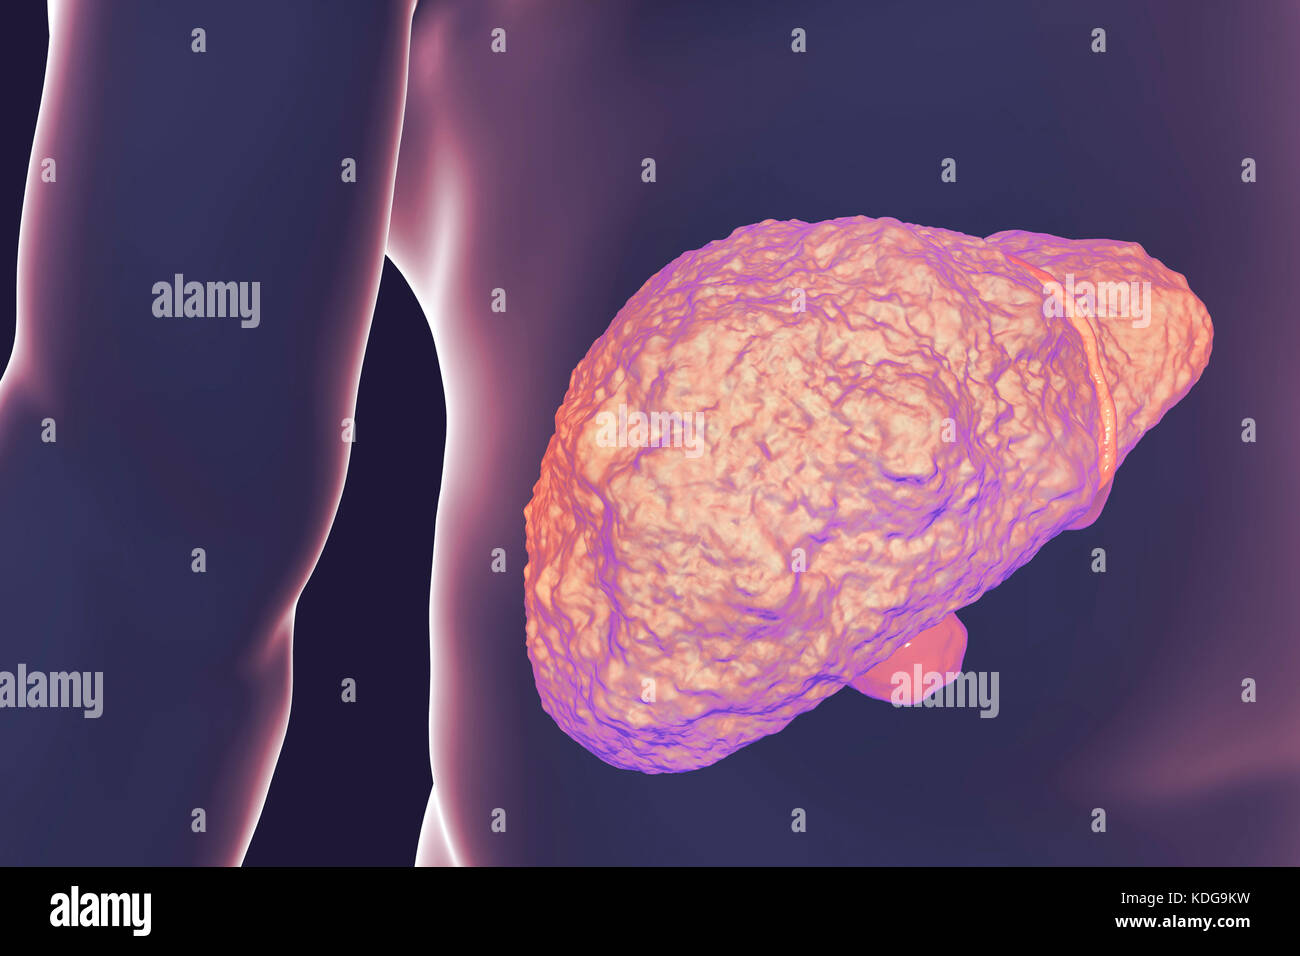 Liver with cirrhosis, computer illustration. Cirrhosis is a consequence of chronic liver disease characterized by fibrosis and scarring of tissue. Stock Photo